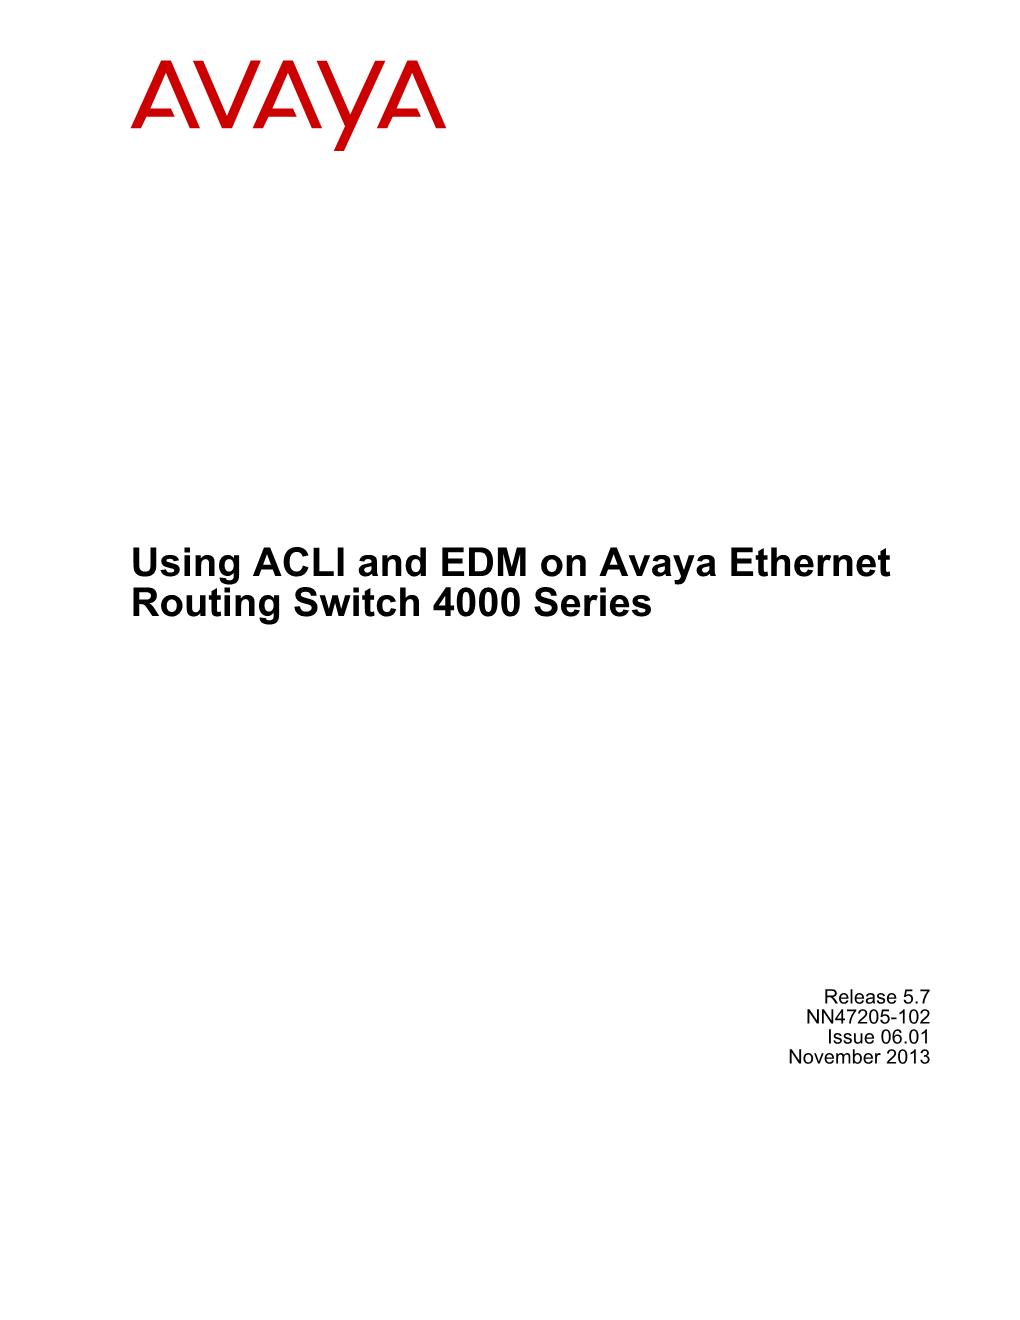 Using ACLI and EDM on Avaya Ethernet Routing Switch 4000 Series